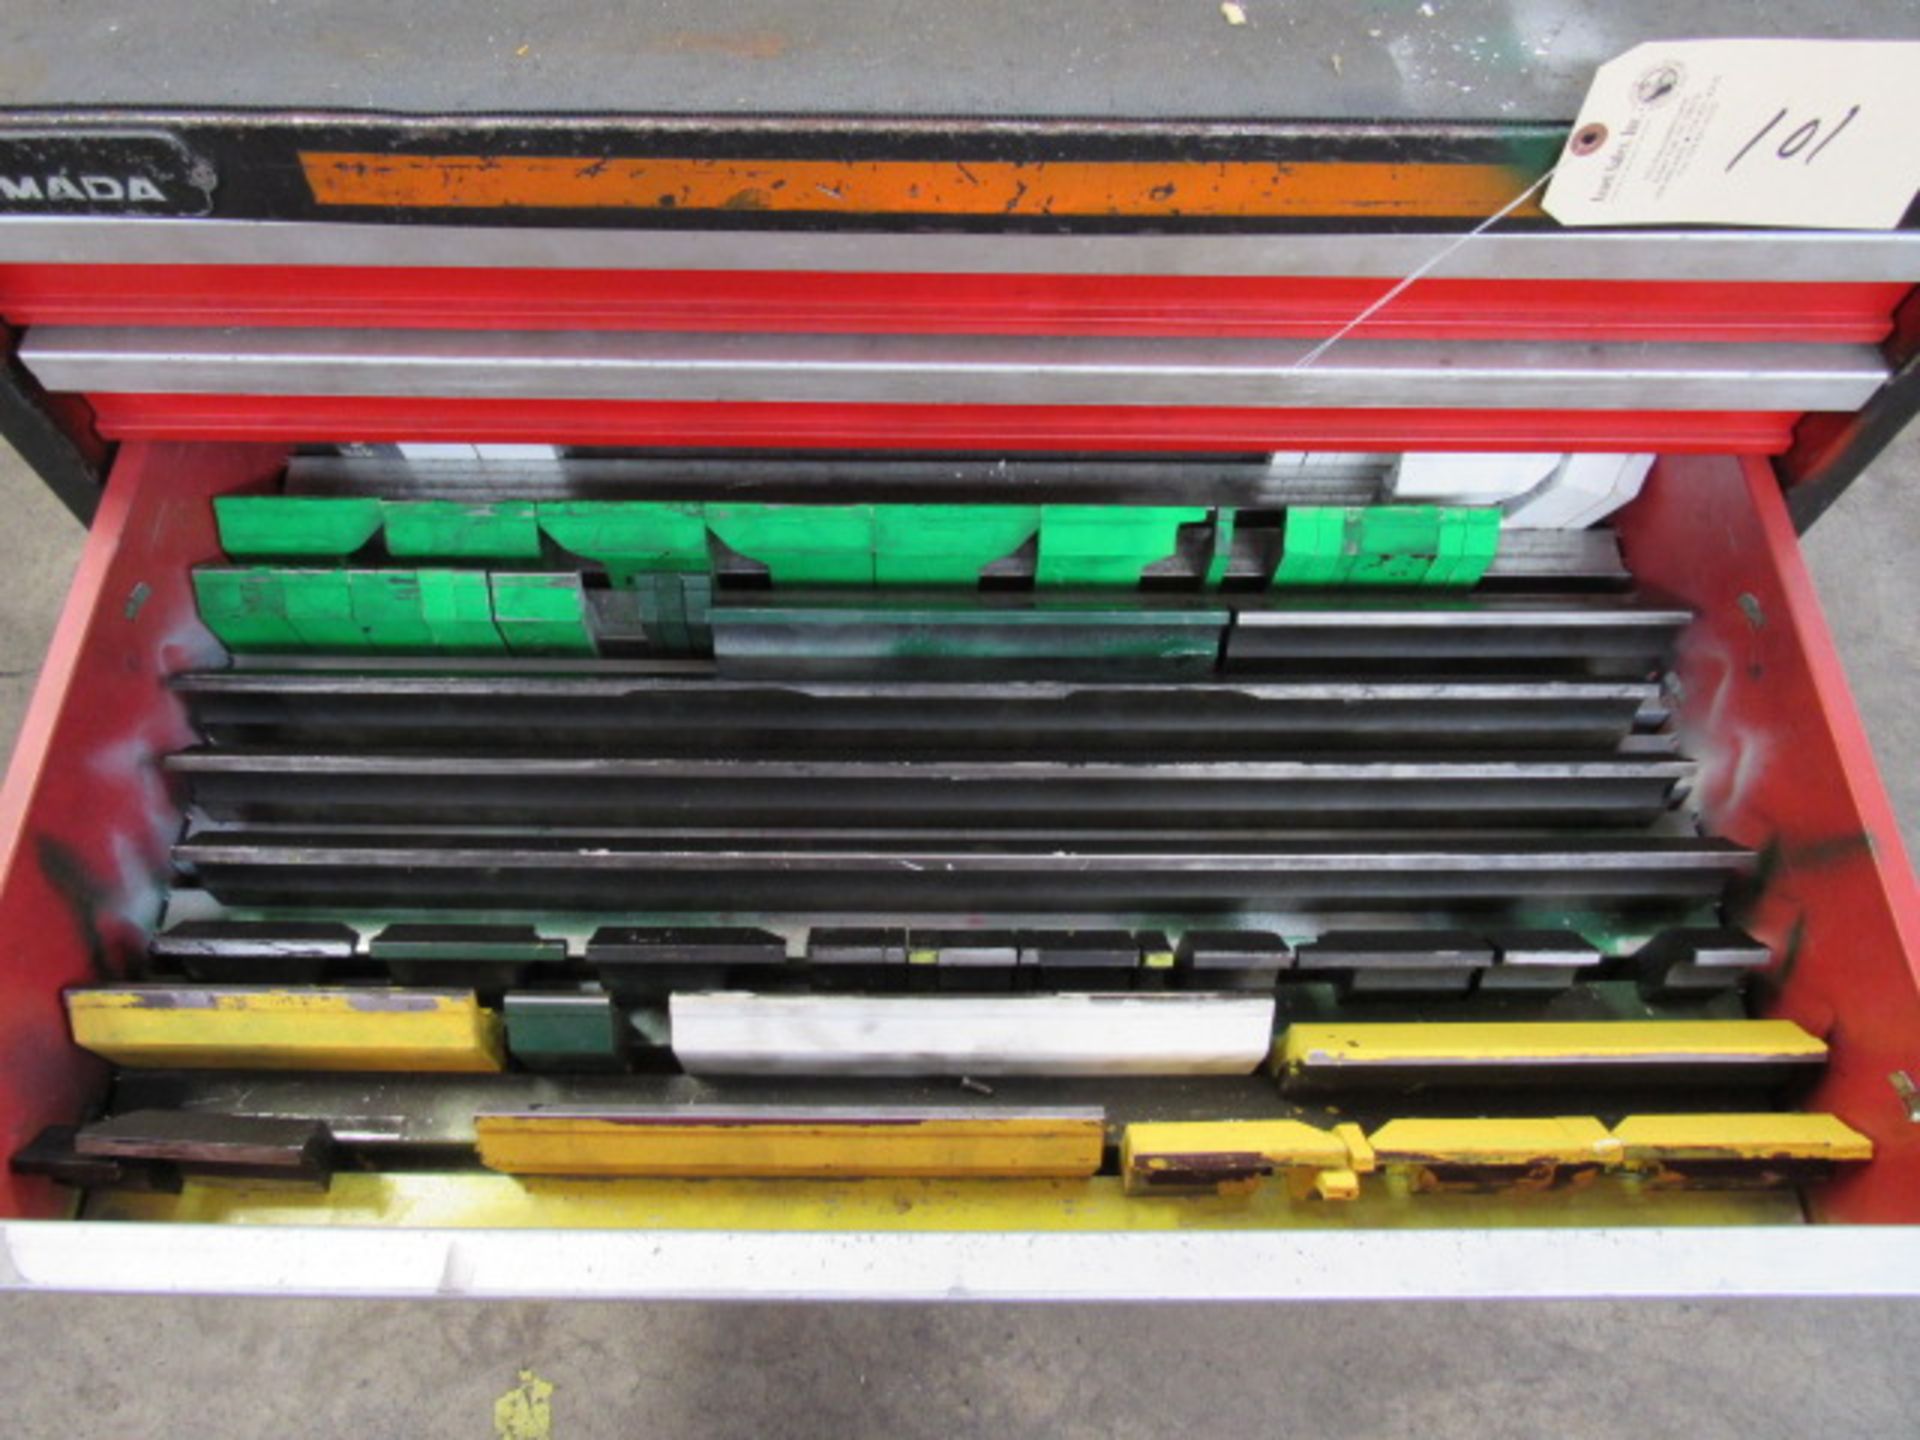 Amada 5 Drawer Portable Cabinet with Press Brake Dies - Image 4 of 6